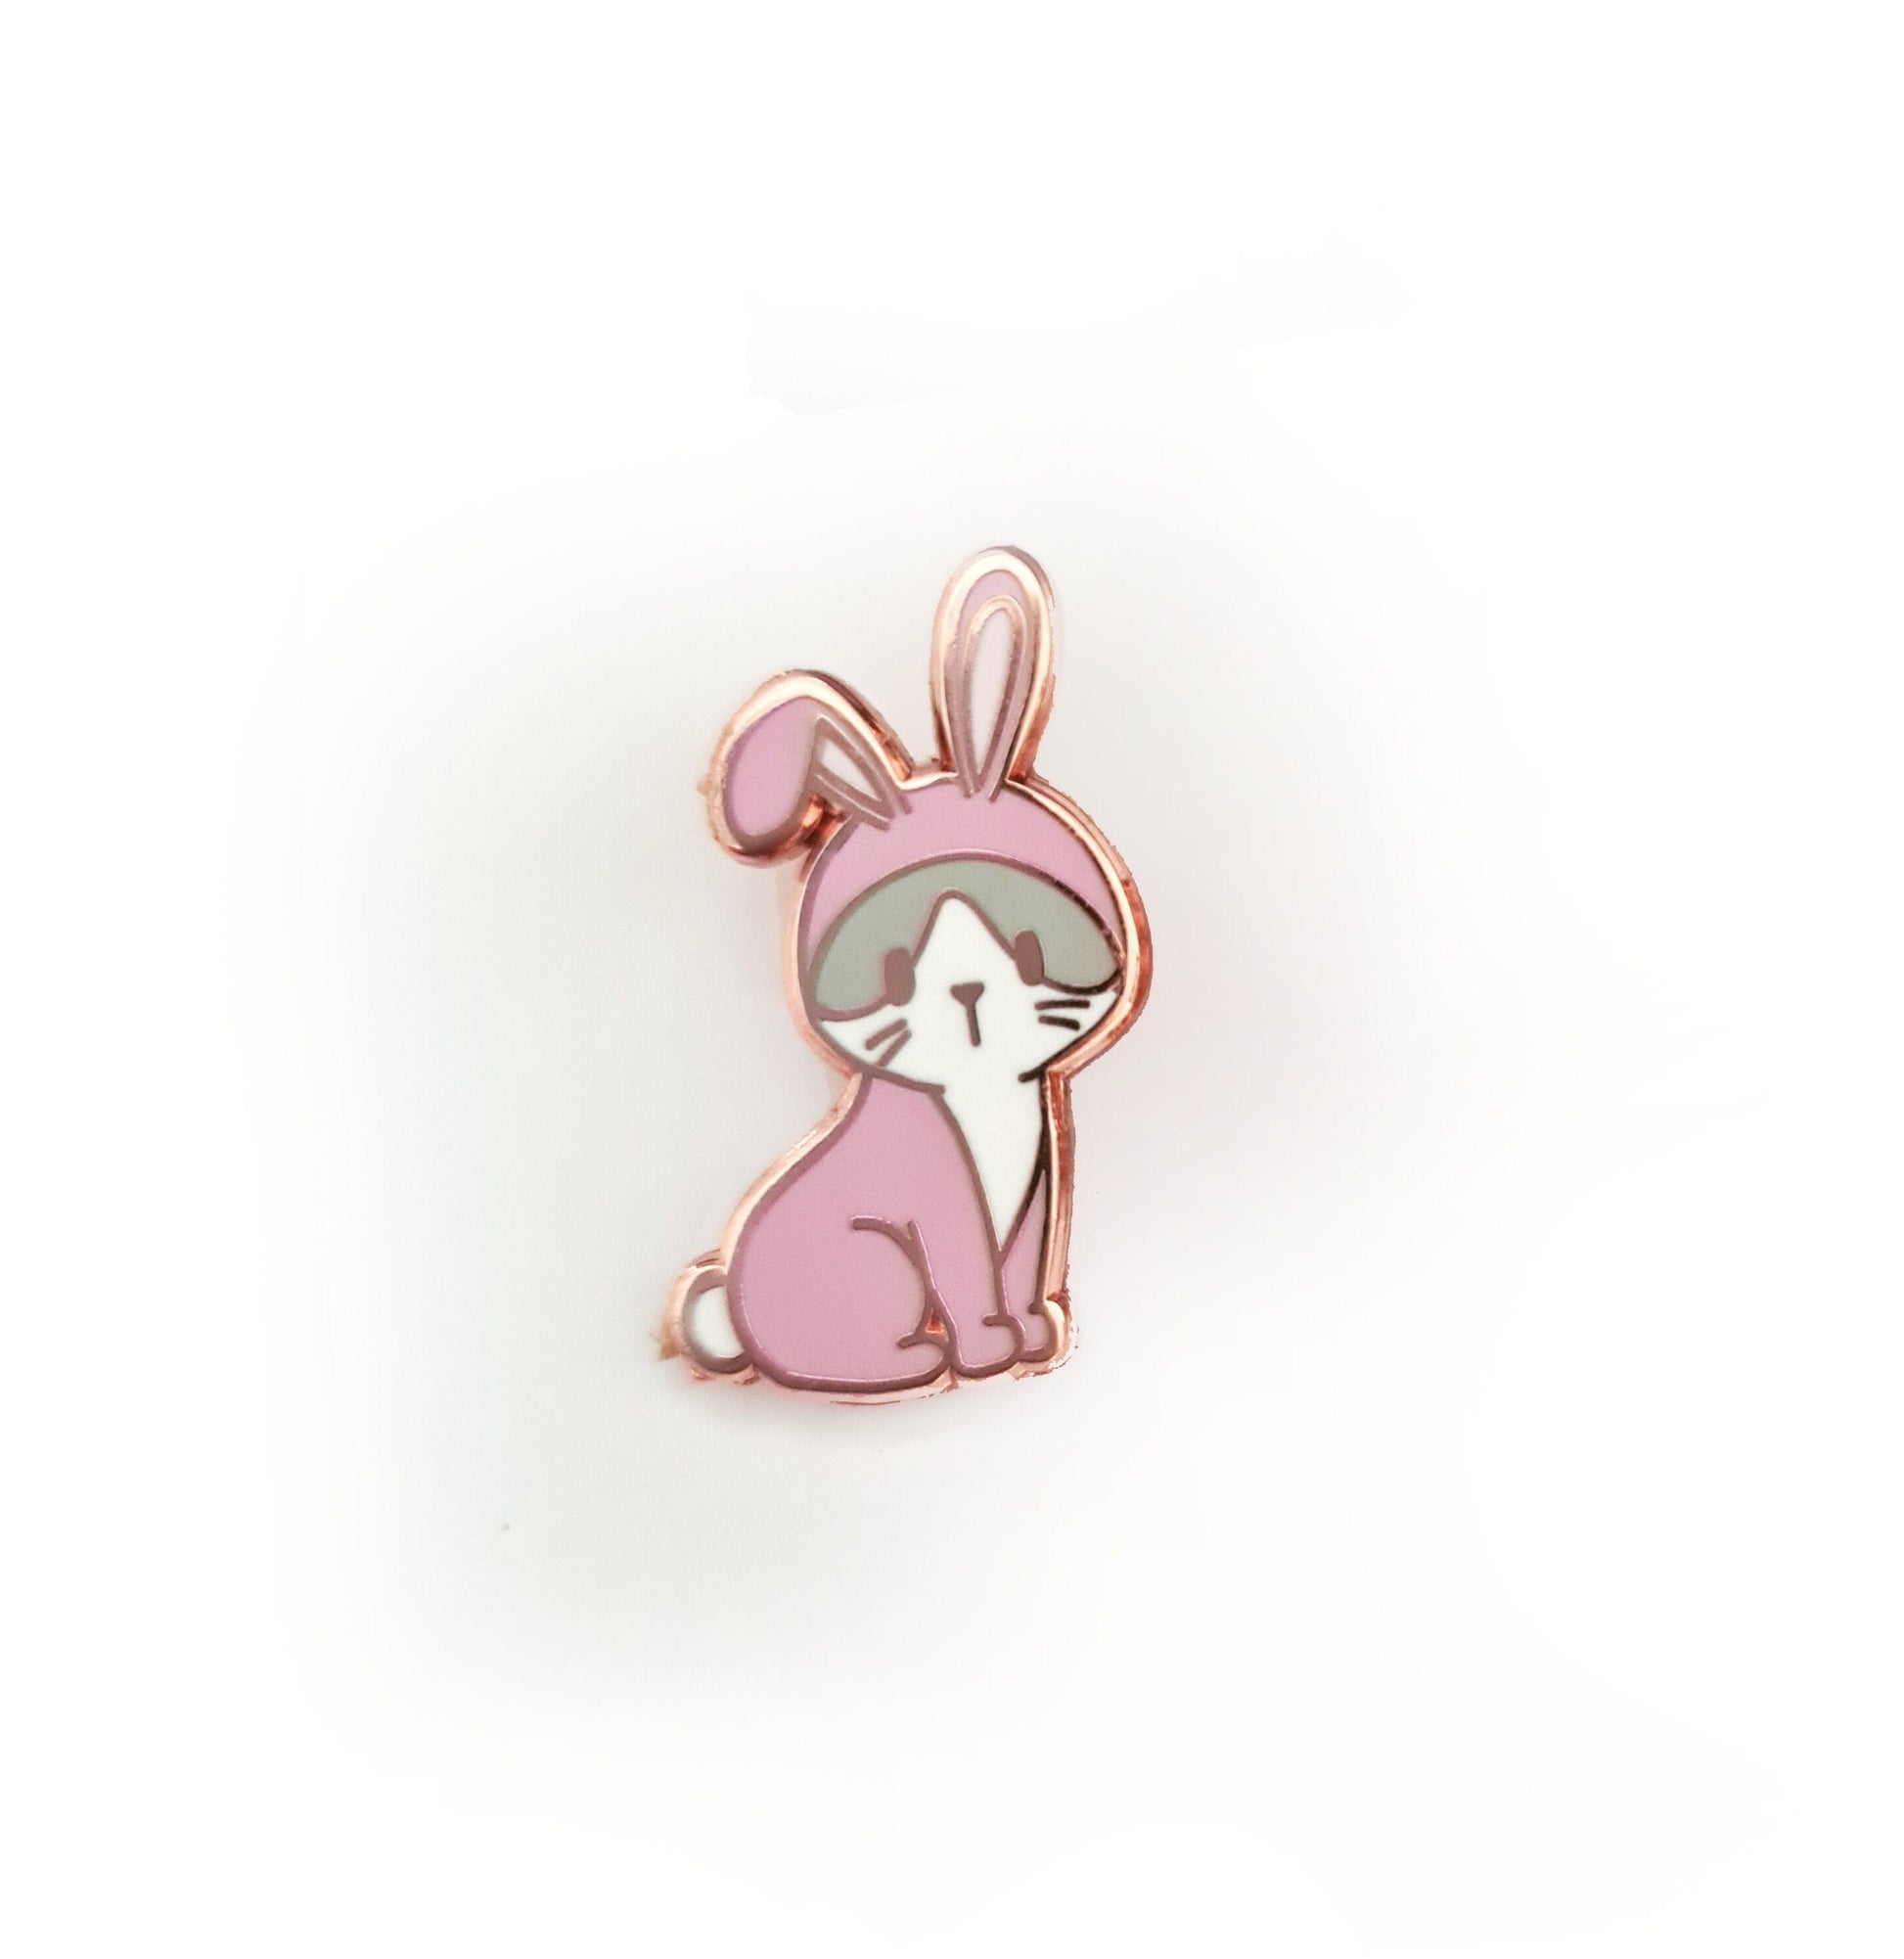 Kitty in Bunny Suit/Costume - Small Enamel Pin, Pins, Brooches & Lapel Pins